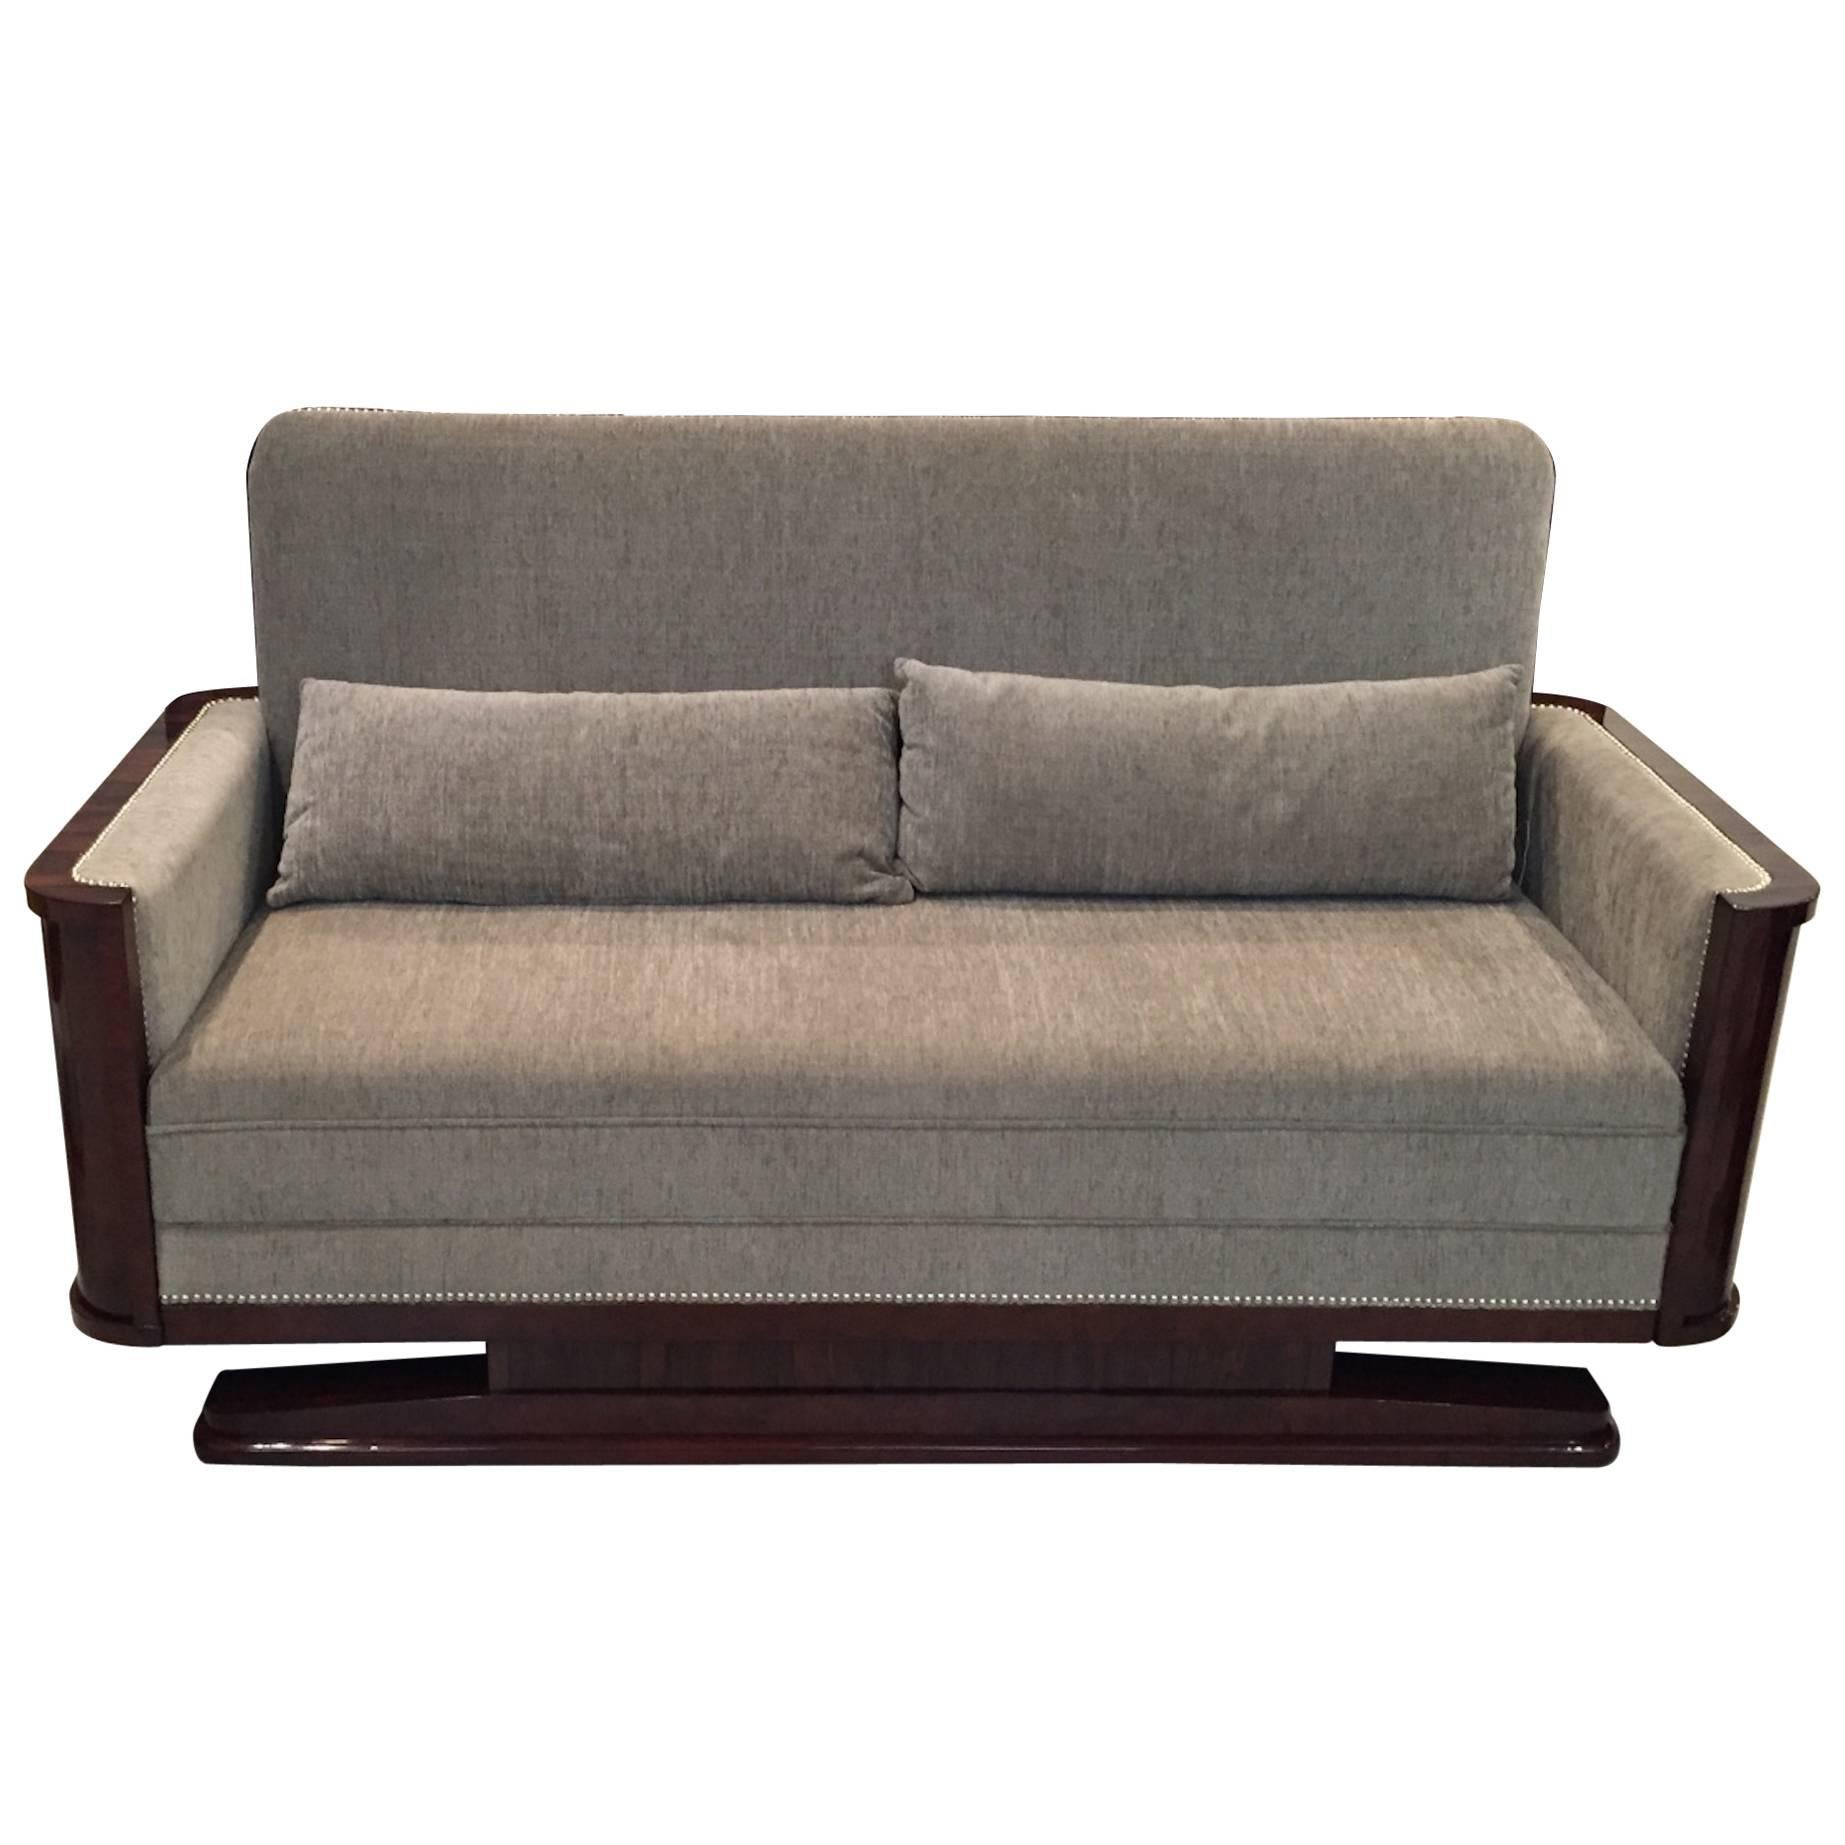 French Art Deco Macassar Sofa For Sale at 1stDibs